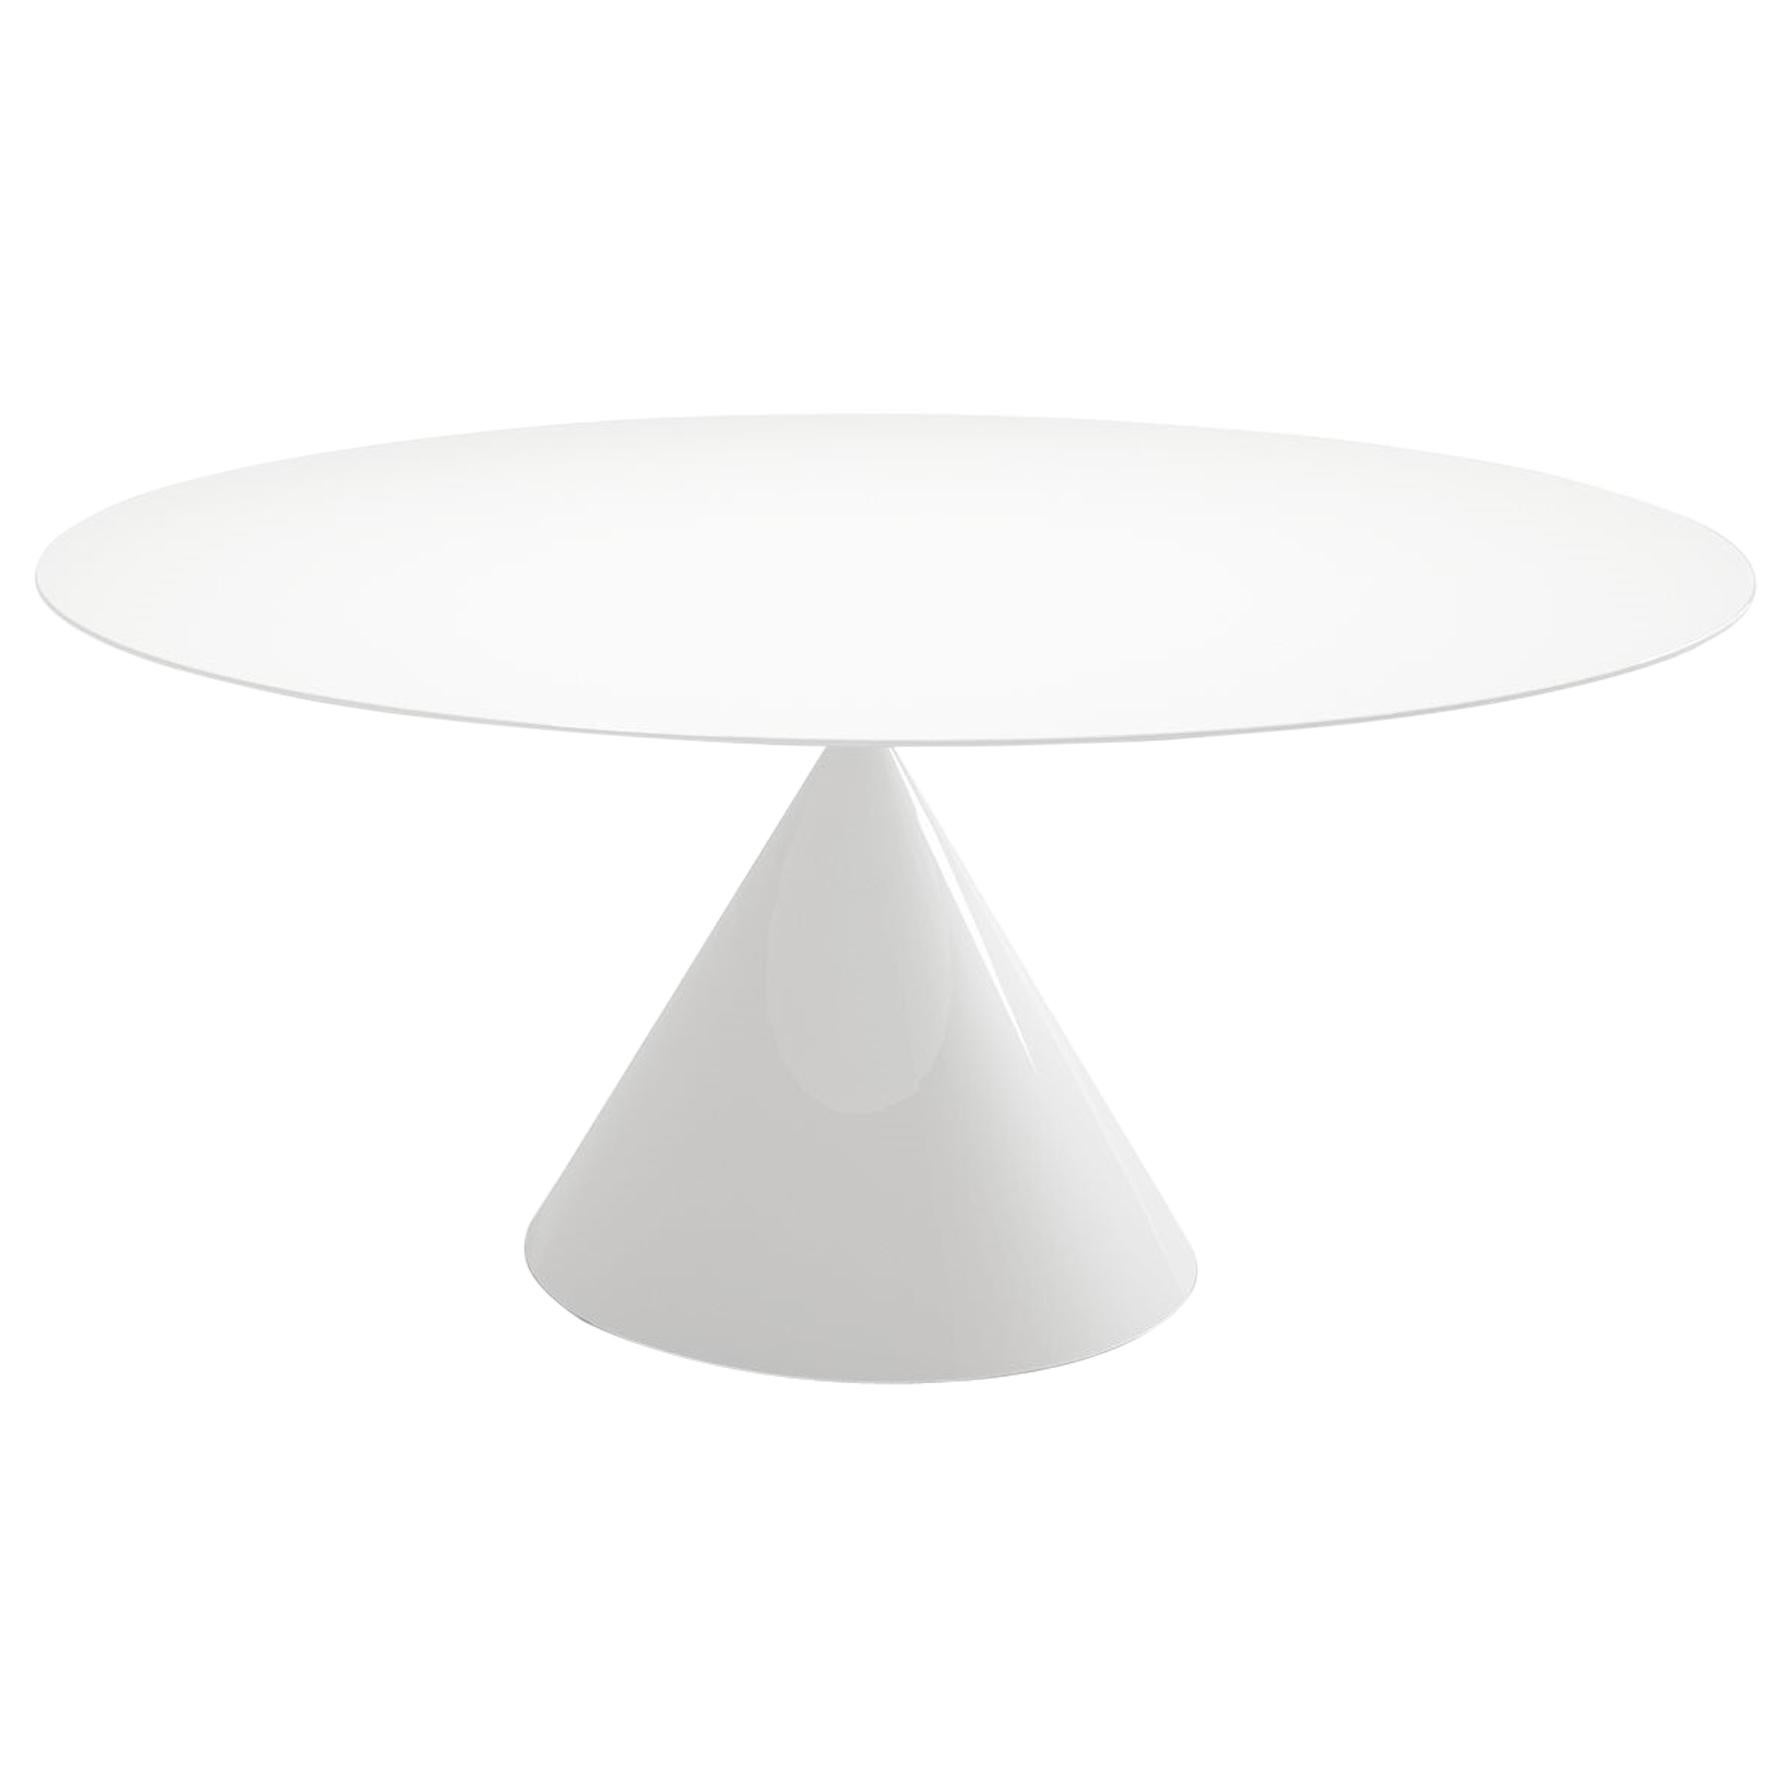 APRIL Desalto OUTDOOR OVAL Clay Table  Designed by Marc Krusin